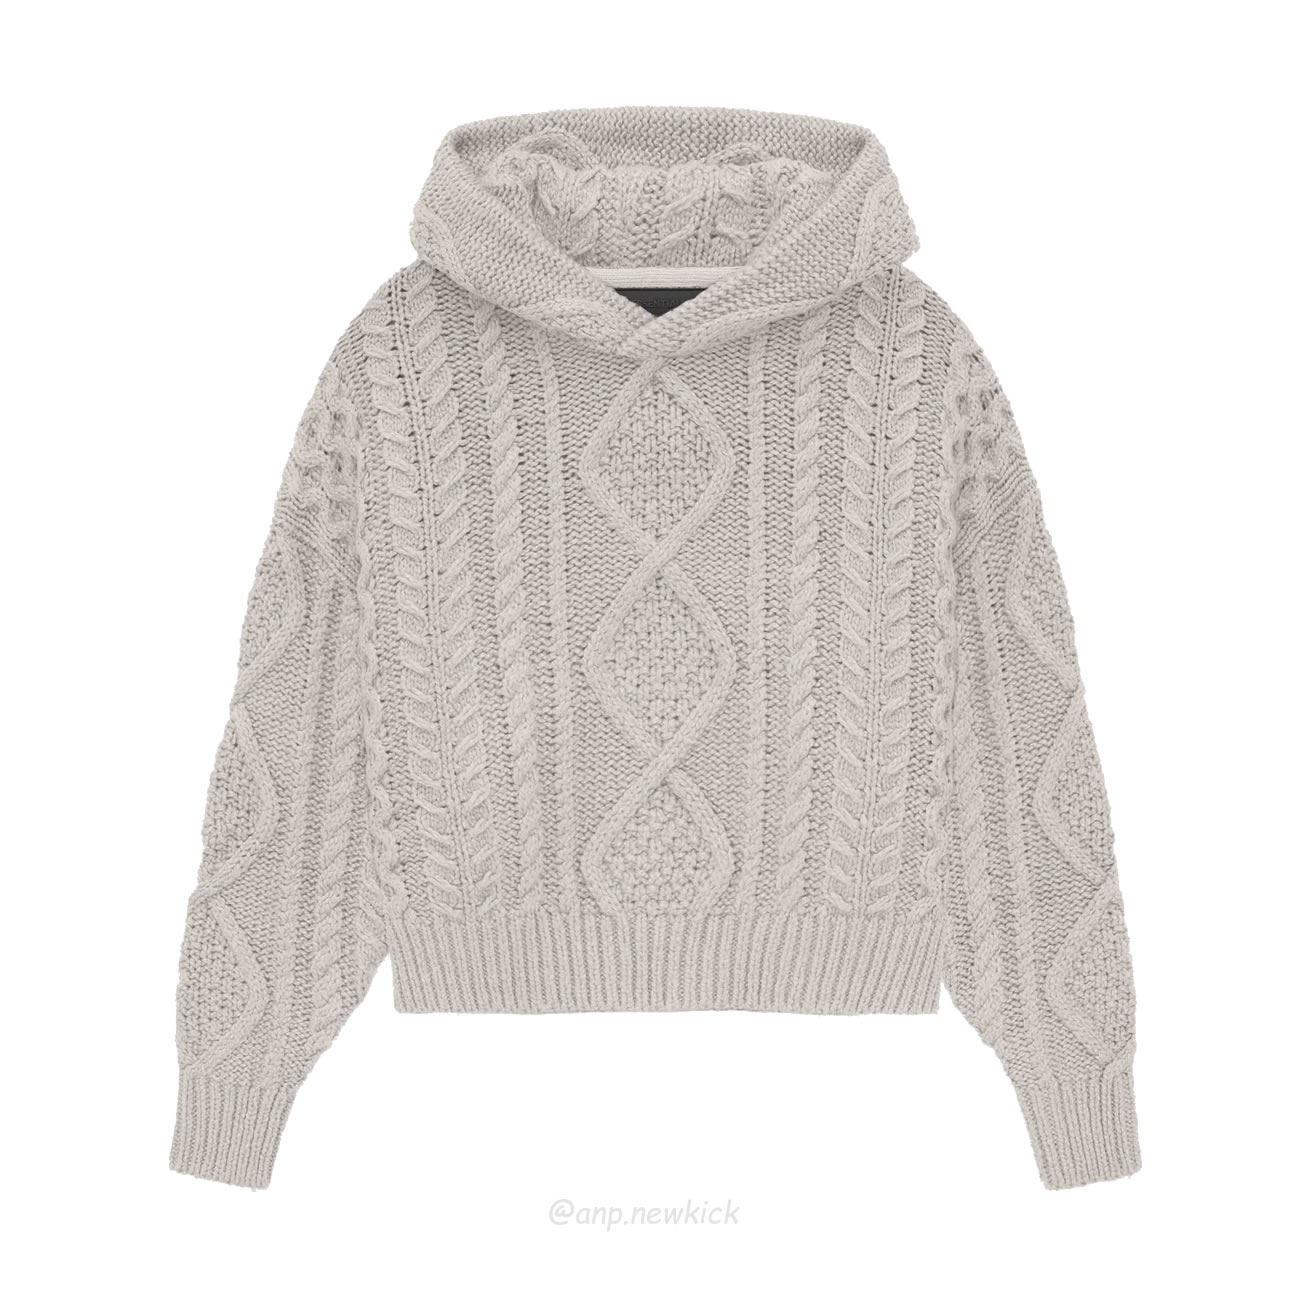 Fear Of God Essentials Fog 23fw New Collection Of Hooded Sweaters In Black Elephant White Beige White S Xl (7) - newkick.org